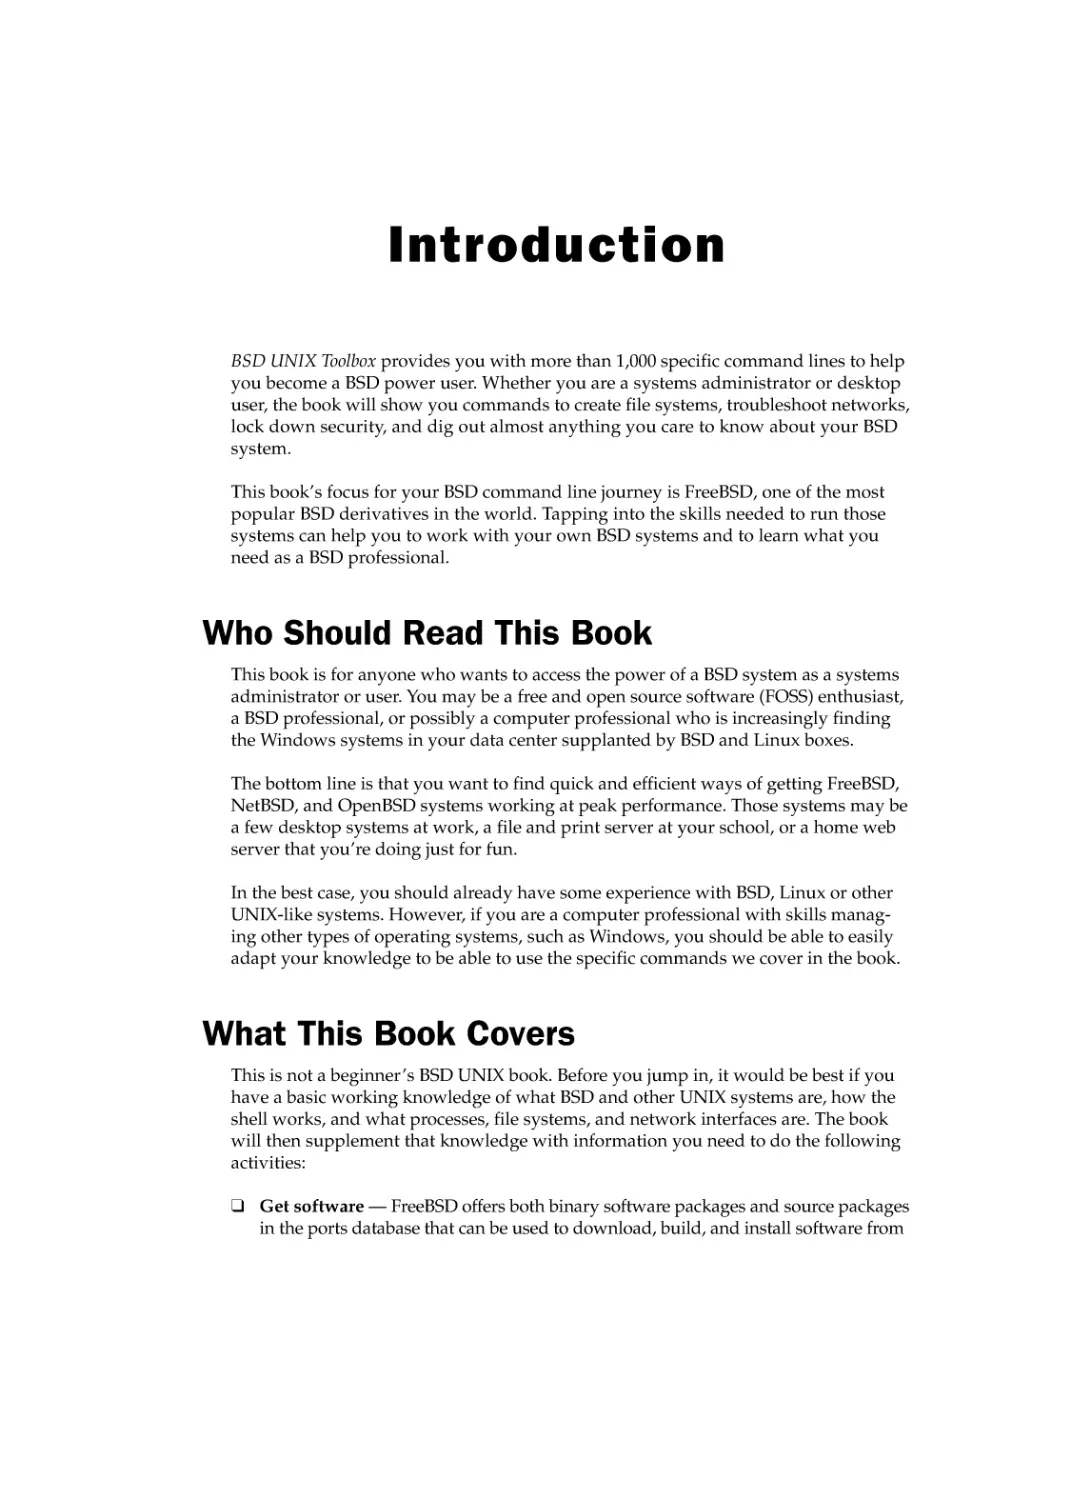 Introduction
Who Should Read This Book
What This Book Covers